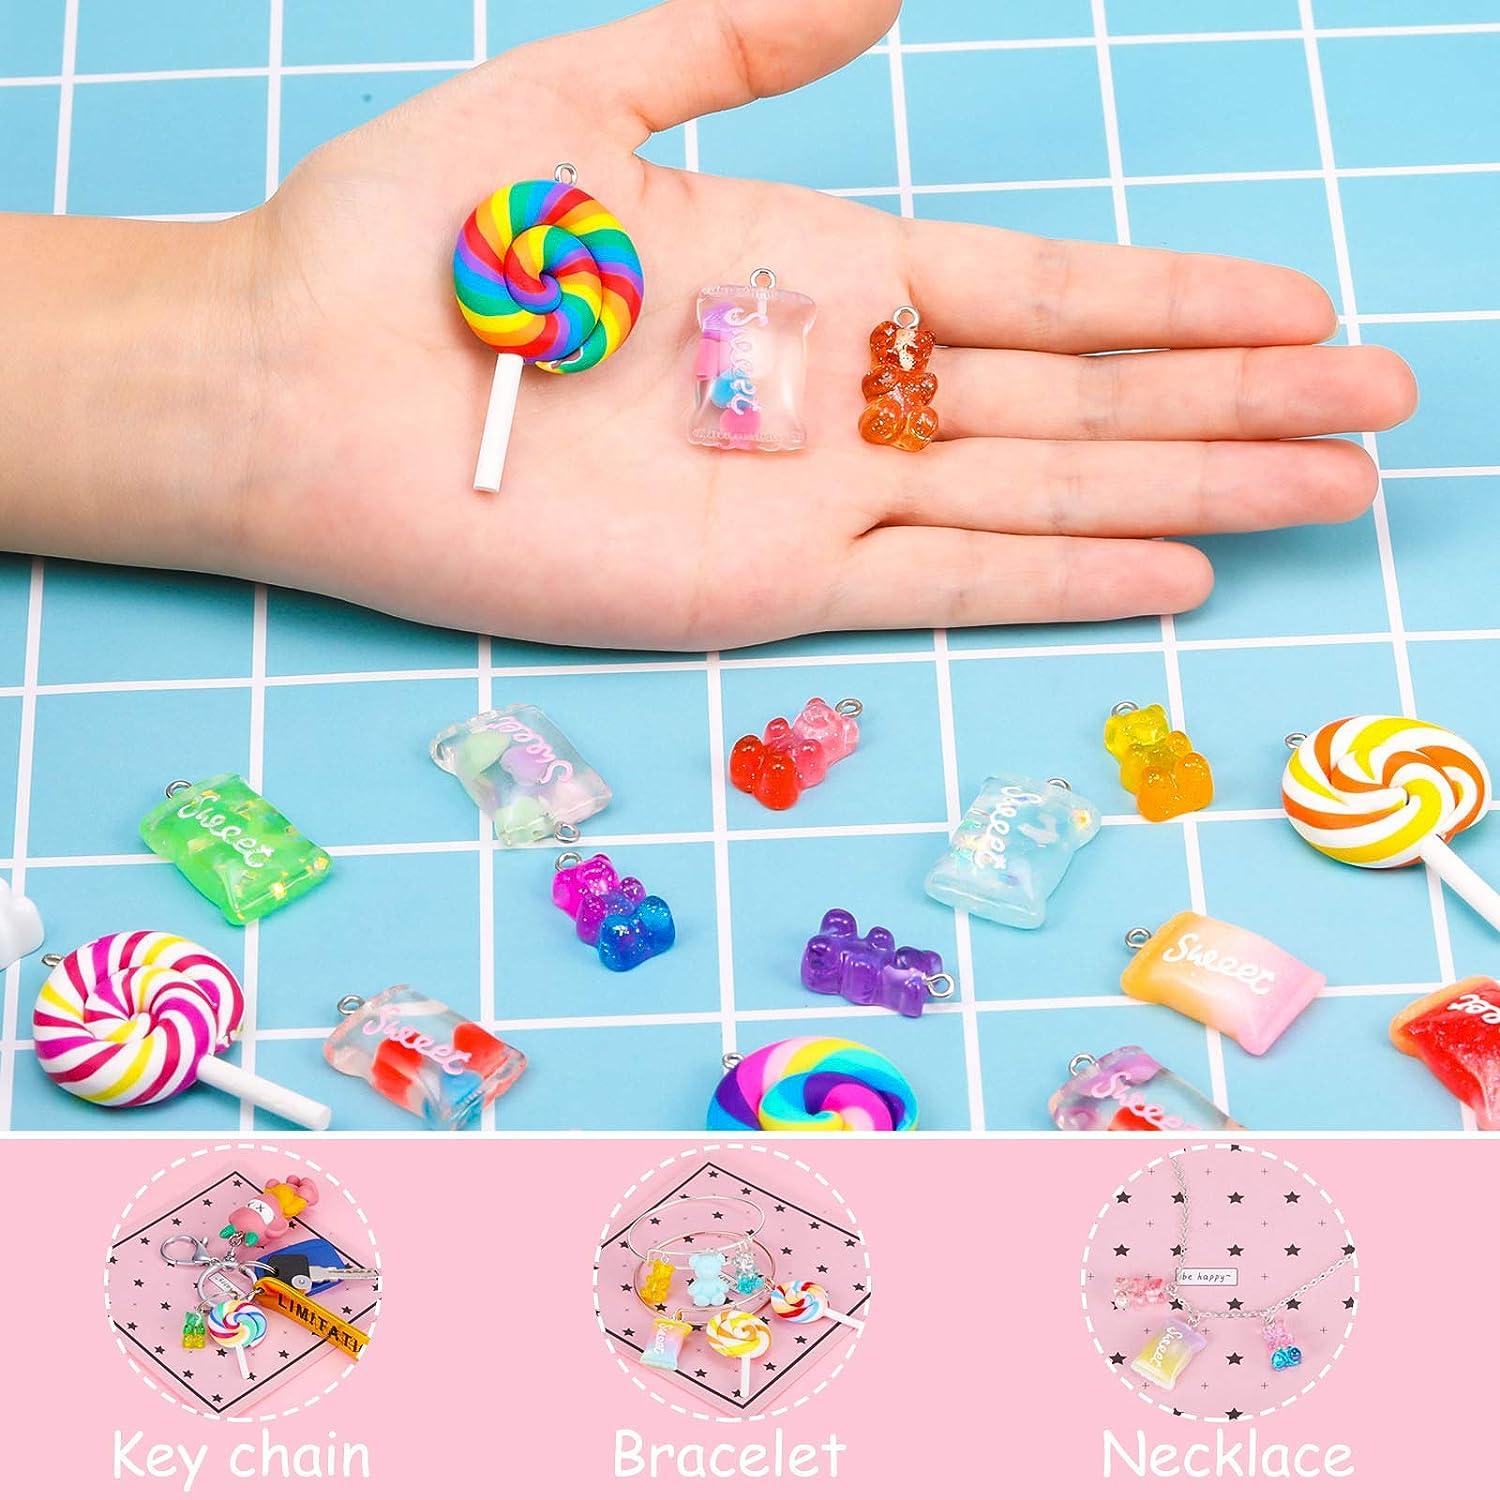 SASBSC Cute Candy Charms Resin Candy Jewelry Charm Lollipops Gummy Bear Charms for Jewelry Making Bracelet Keychain Necklace